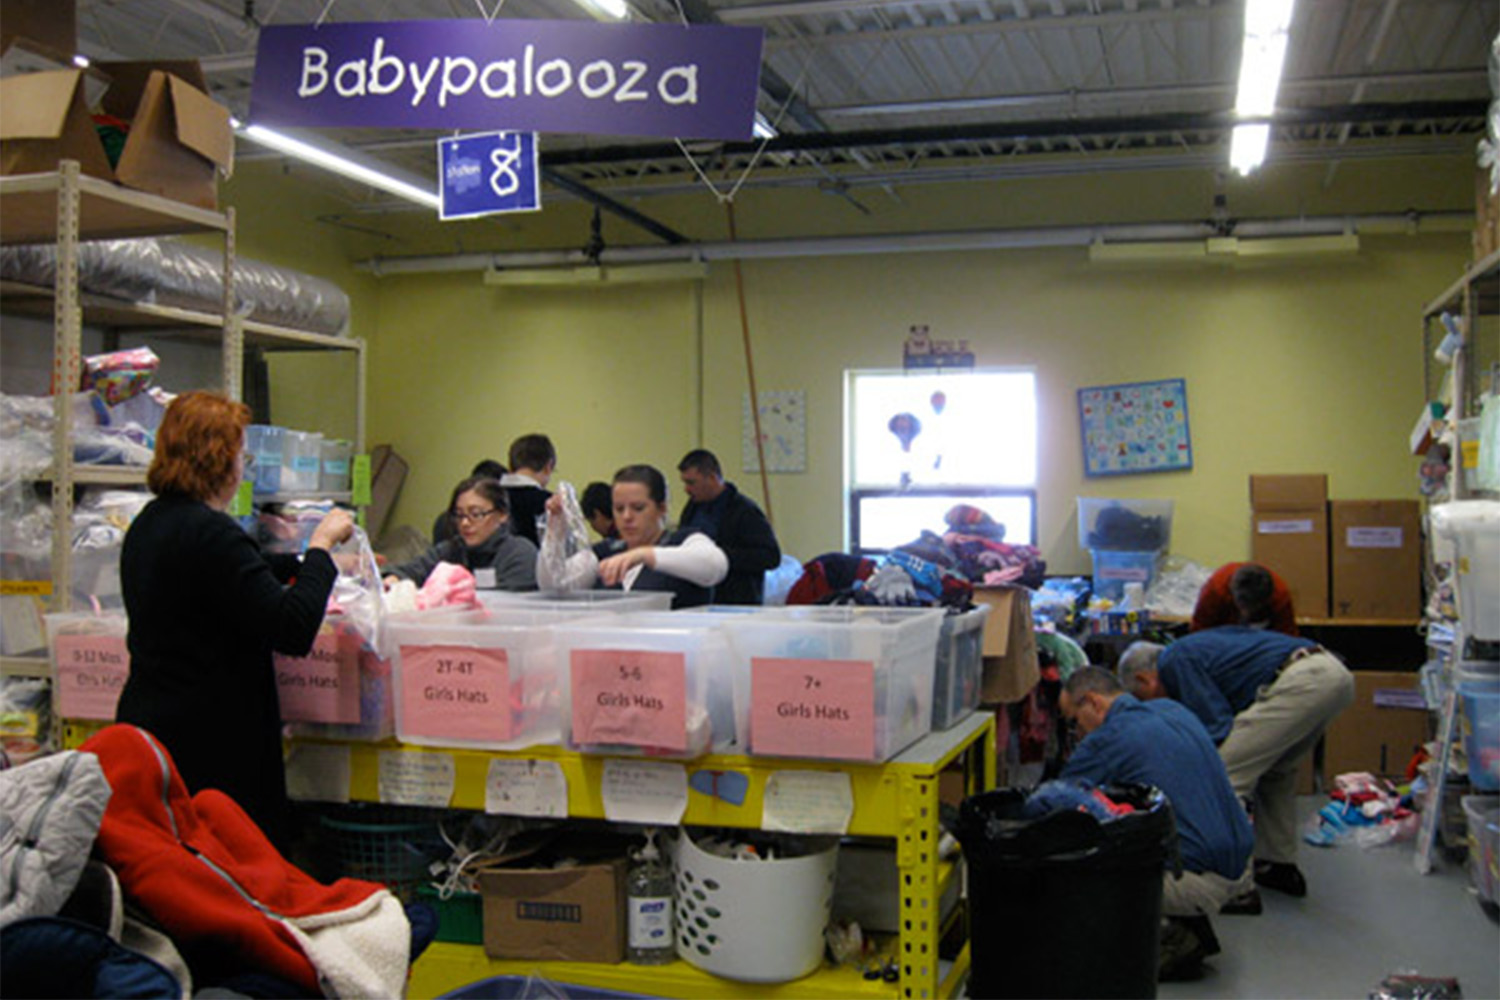 Tocci volunteers sorting through cloths at the "babypalooza" section 